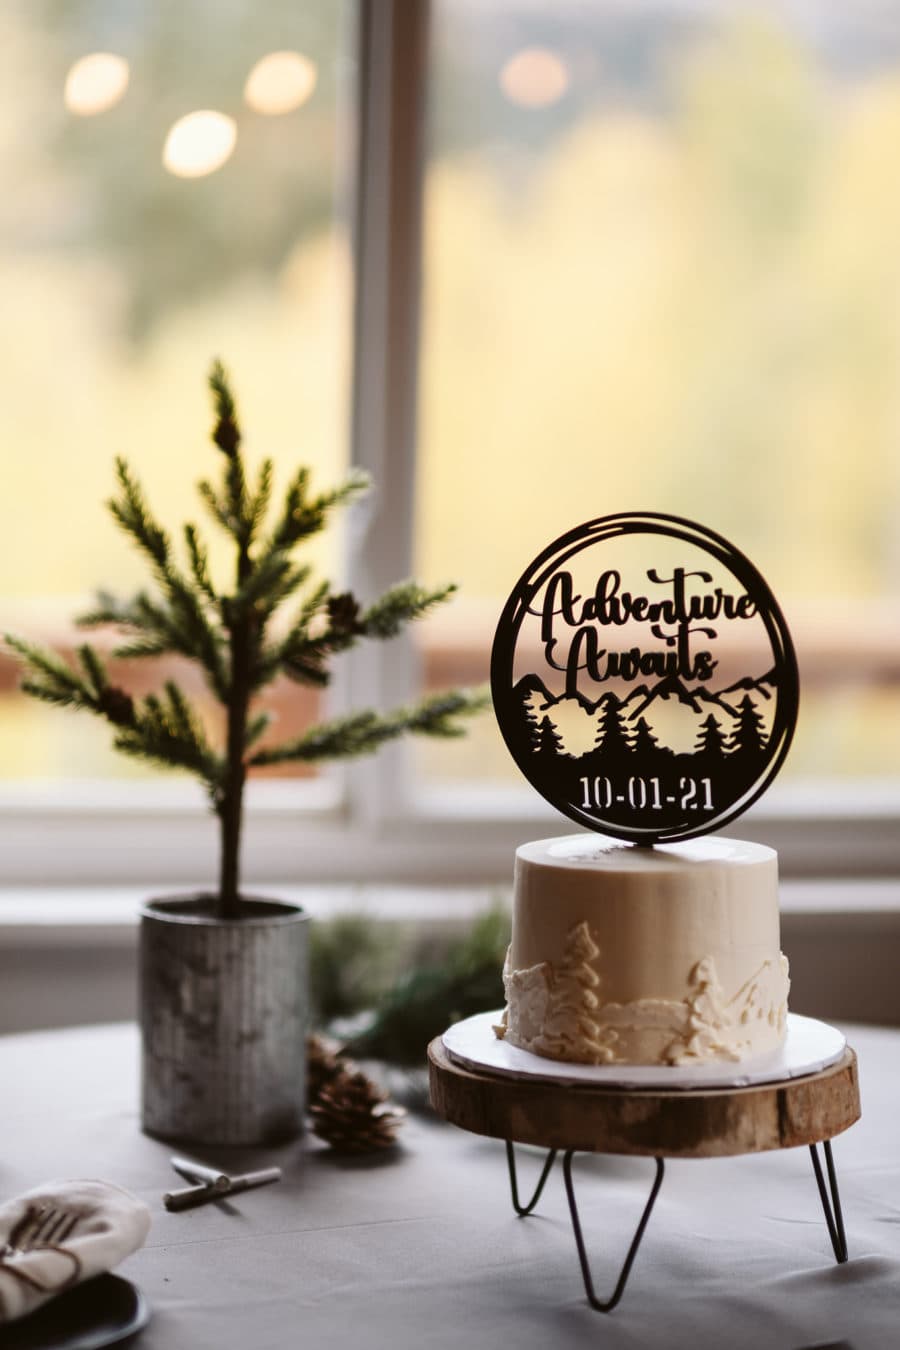 Elopement cake with "adventure awaits" cake topper